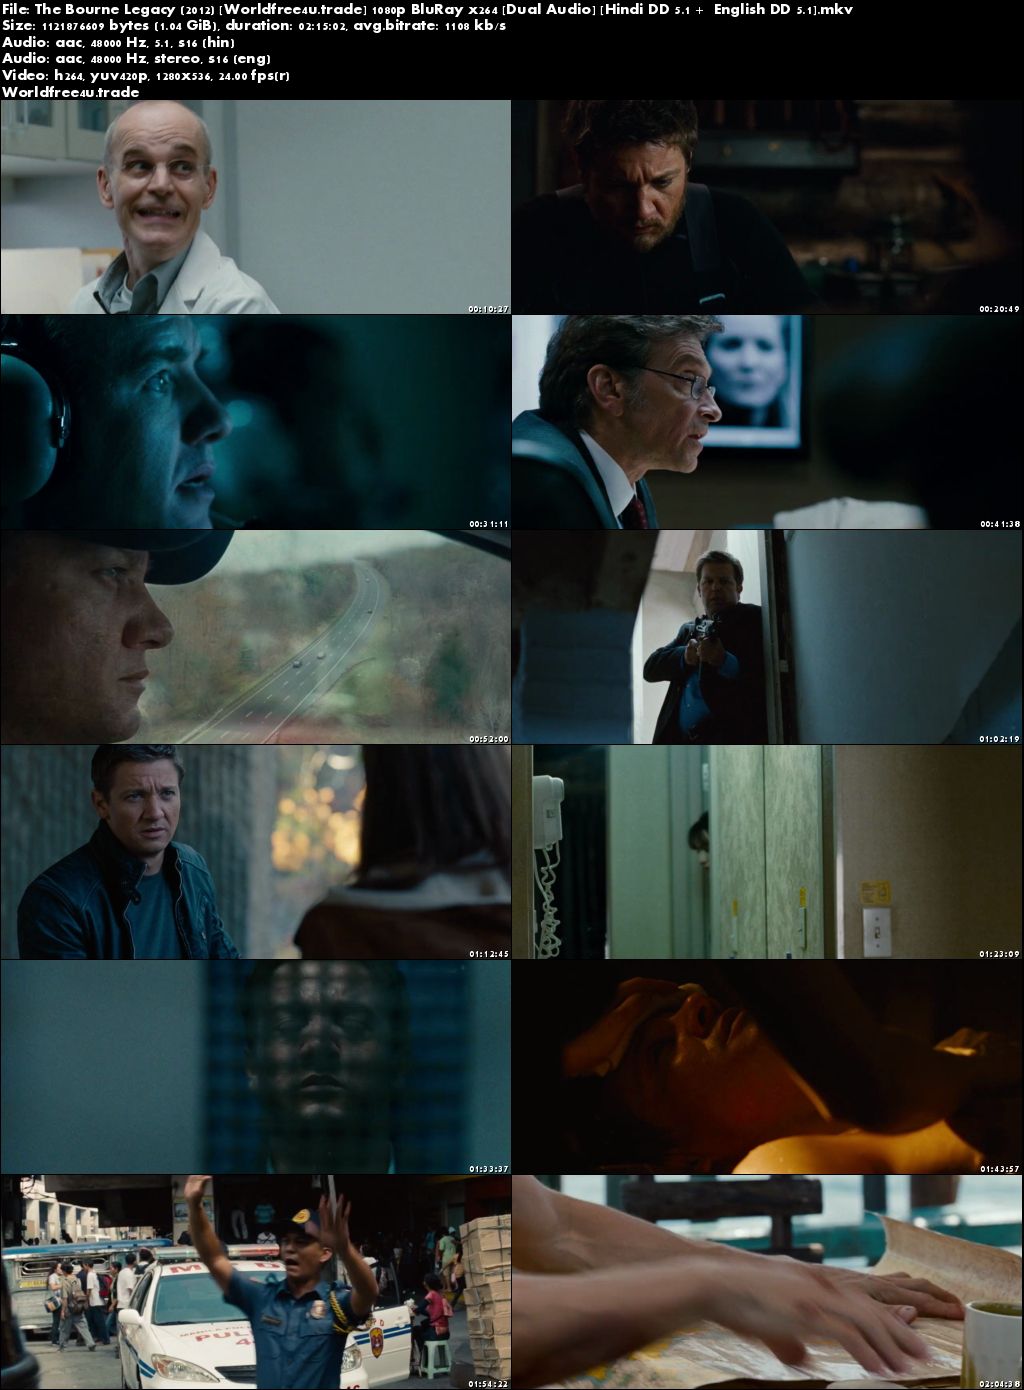 the bourne legacy full movie in hindi free download 720p